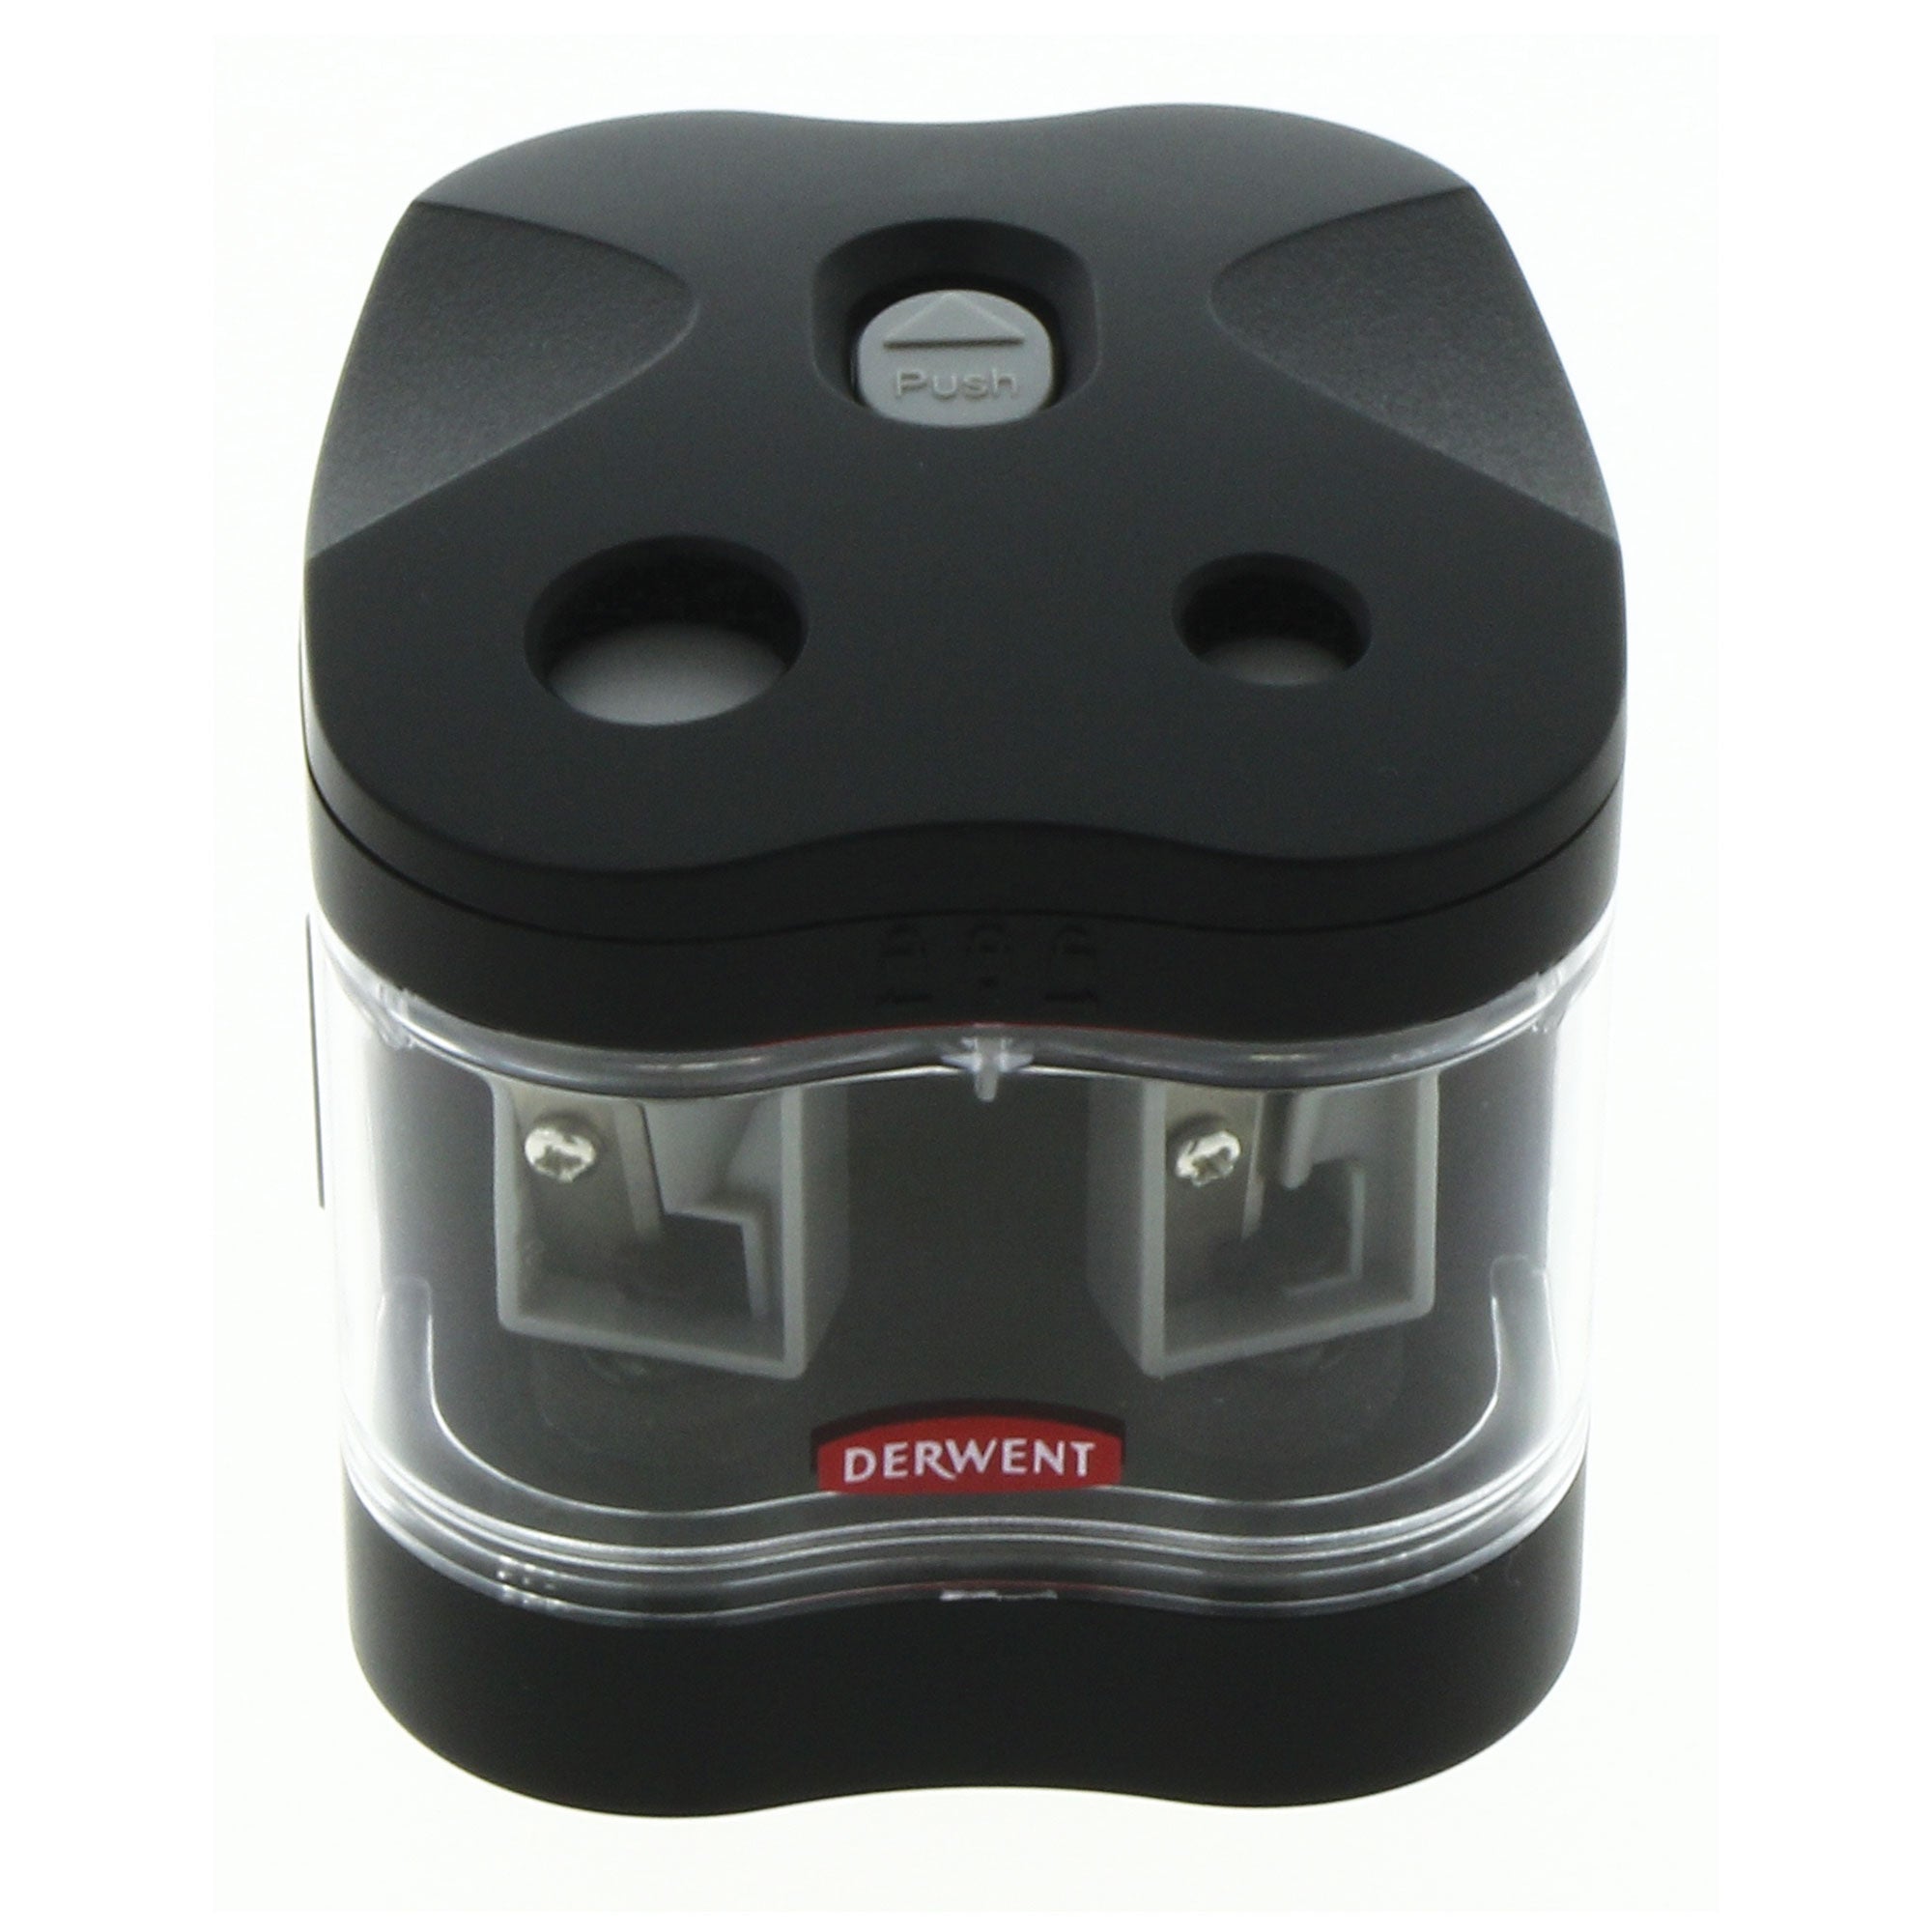 Derwent Twin Hole Battery Operated Pencil Sharpener